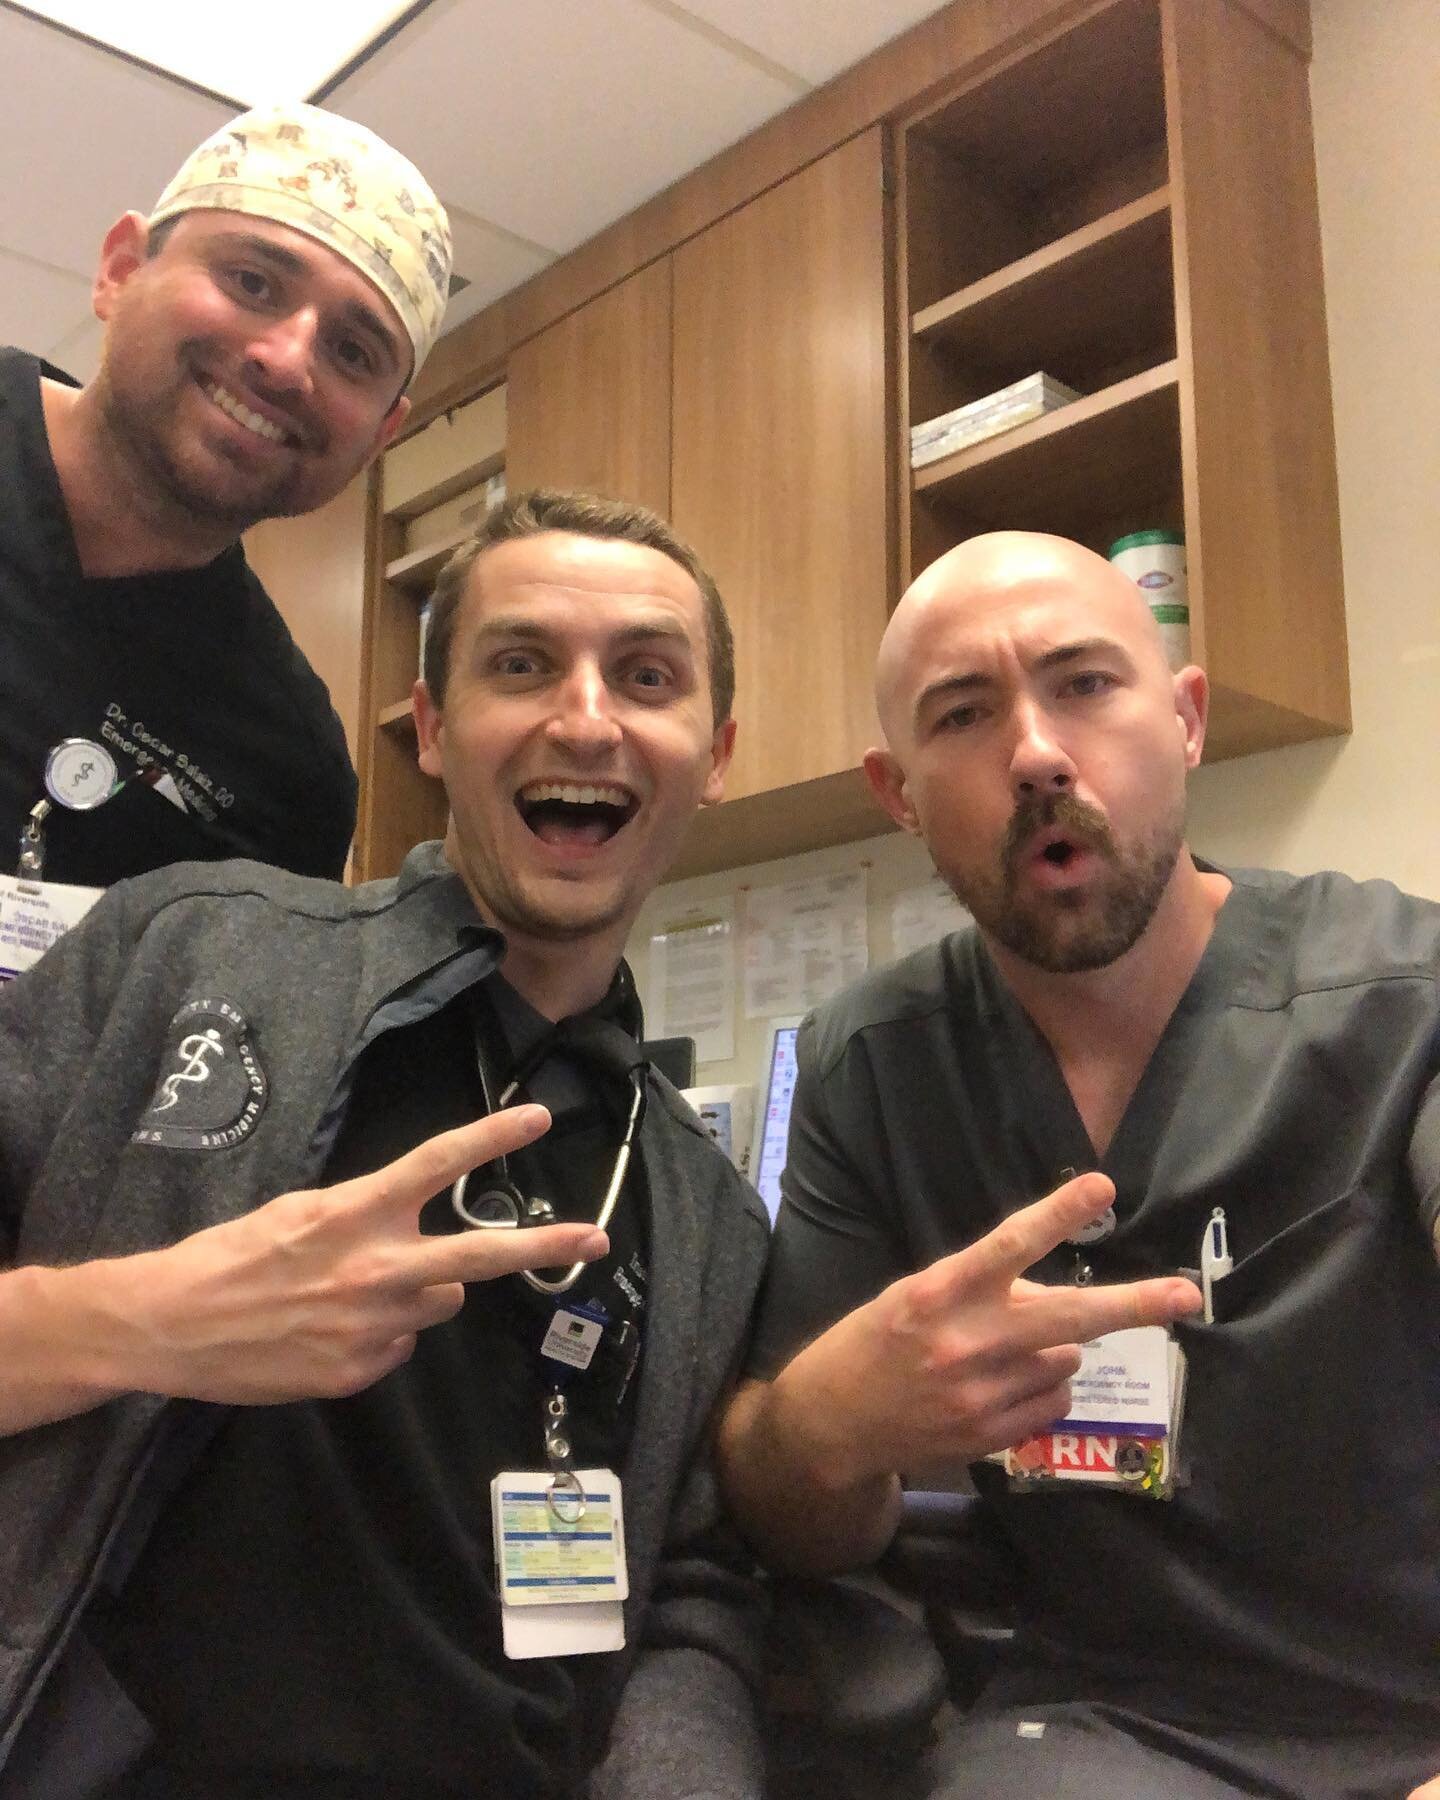 Don&rsquo;t leave your cellphone unattended 😂 #phonobombers #emergencymedicine